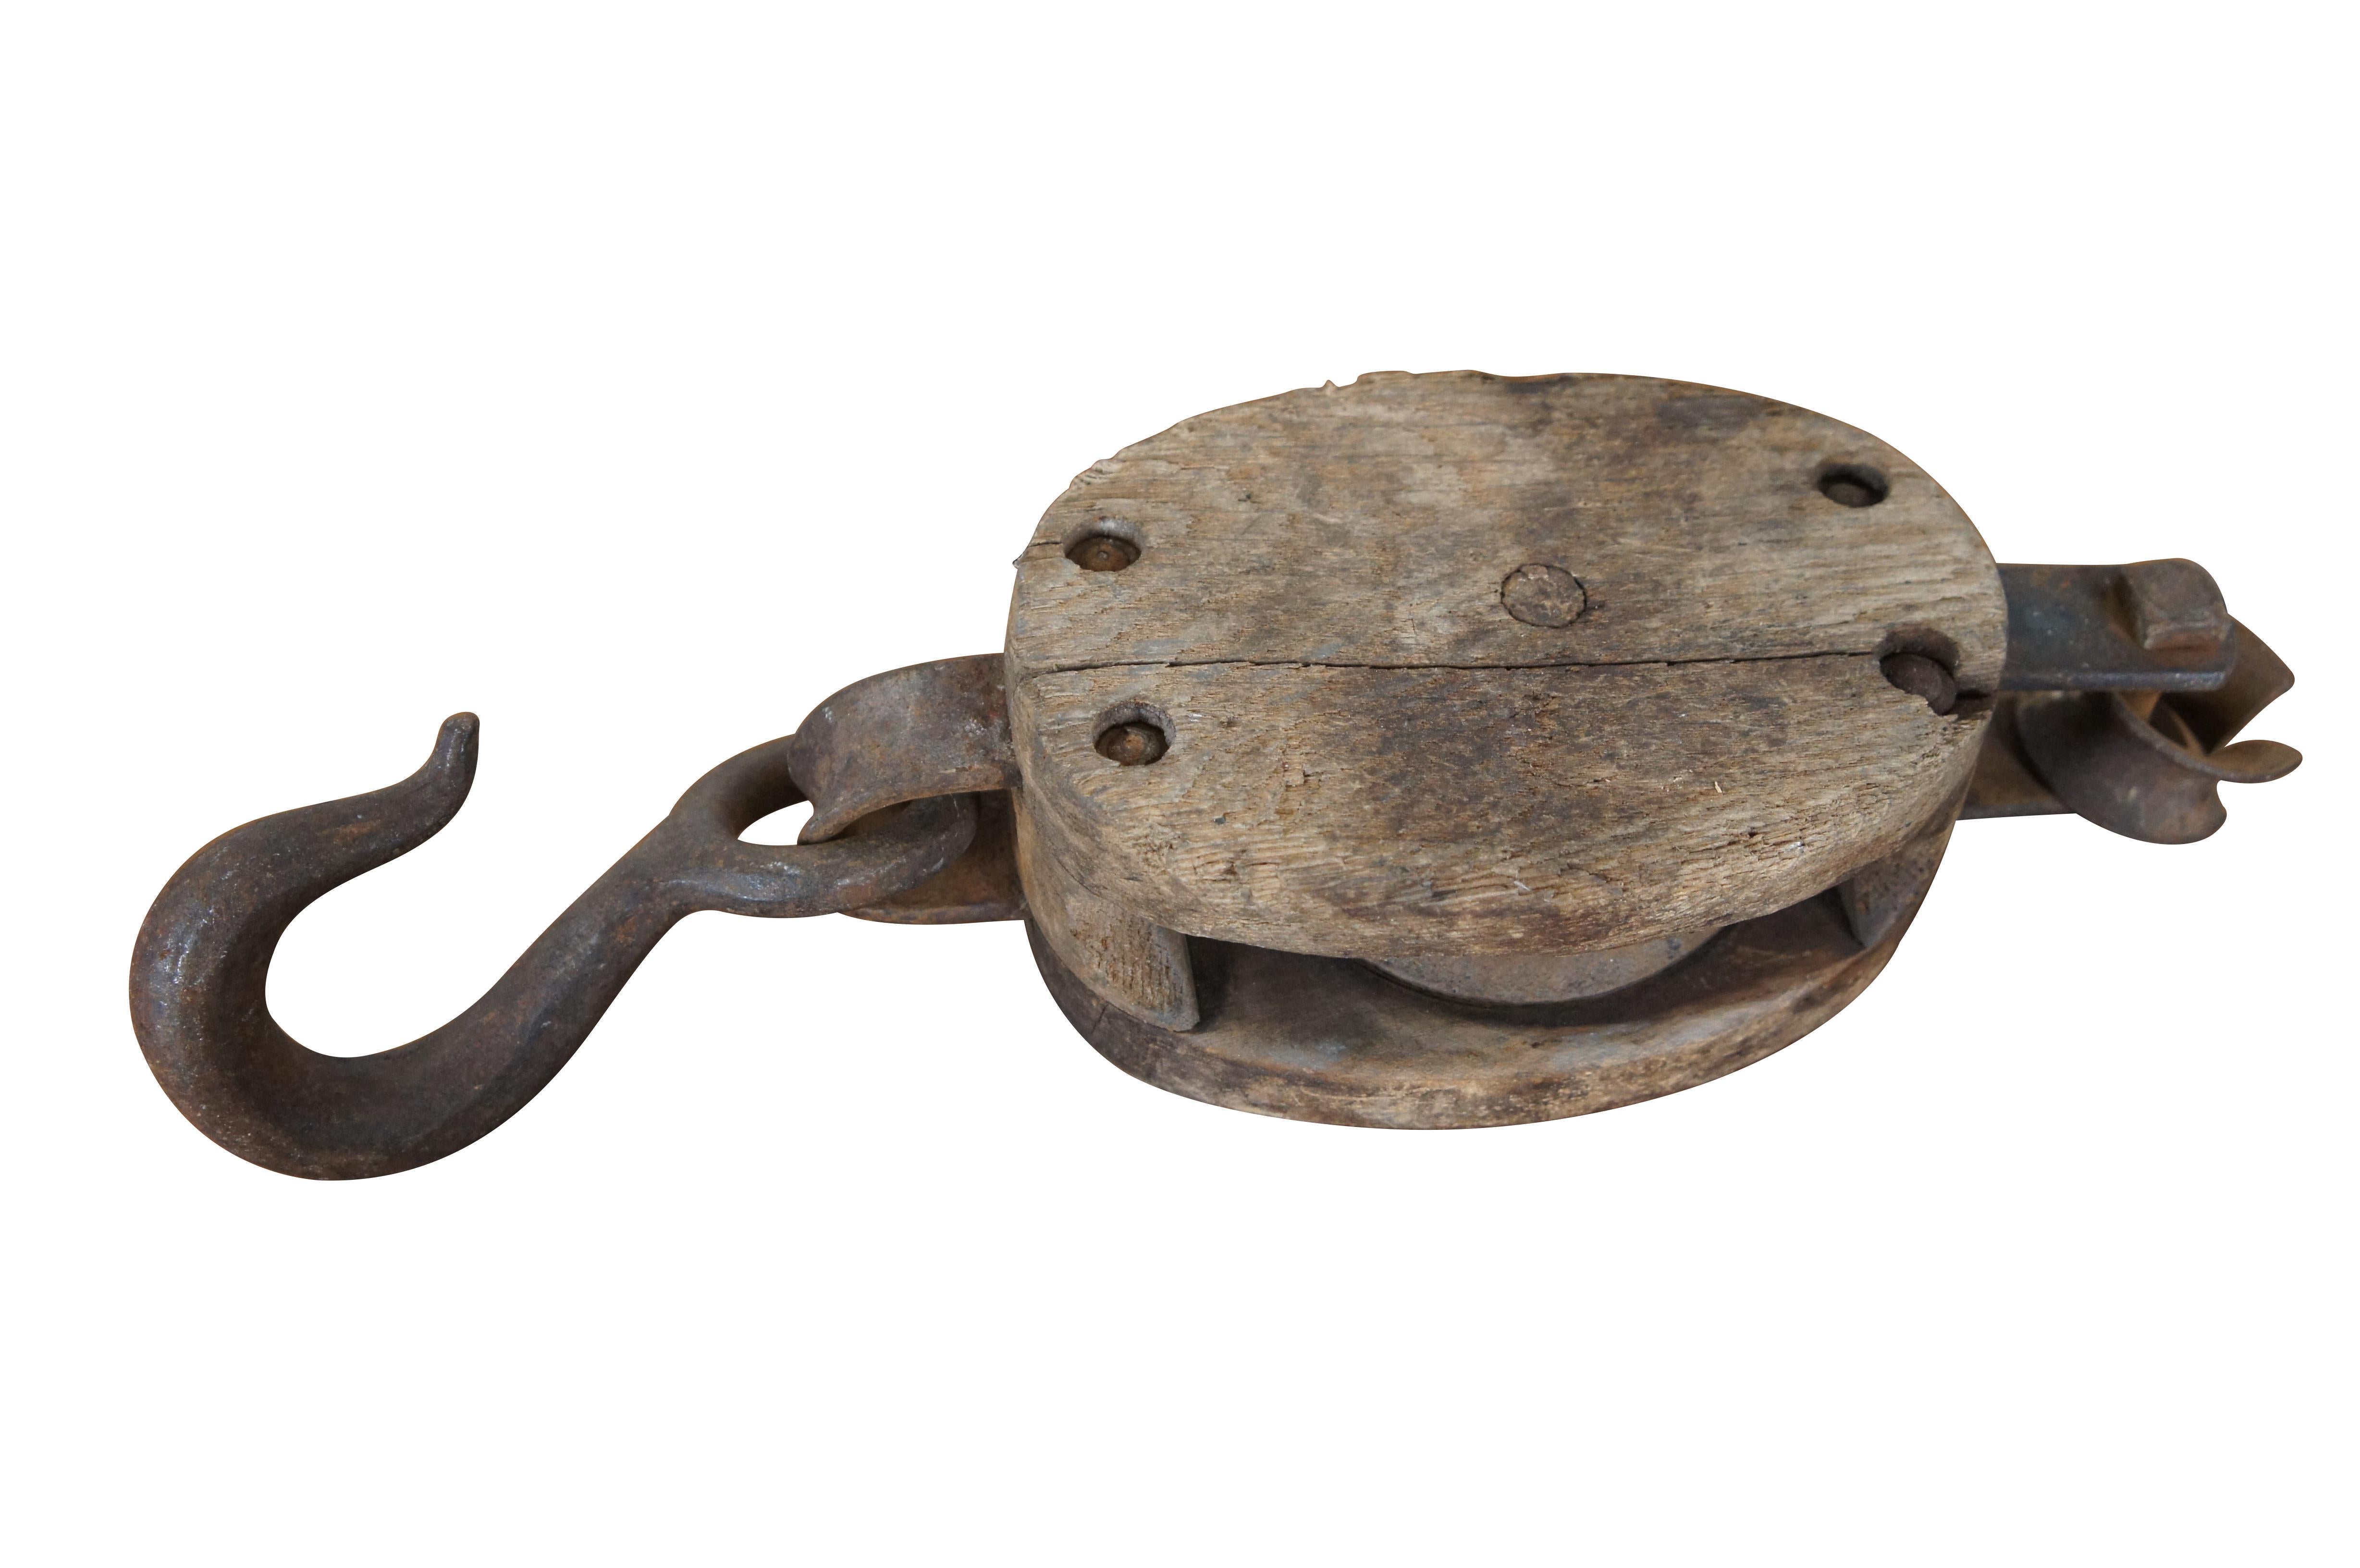 Two primitive antique iron and wood pulley hoist hooks, one by Starline.  Rustic, nautical, industrial, farmhouse, cabin decor.


DIMENSIONS:
Large - 4.25” x 2.75” x 13.75” / Small - 3.75” x 2.75” x 12” (Width x Depth x Height)